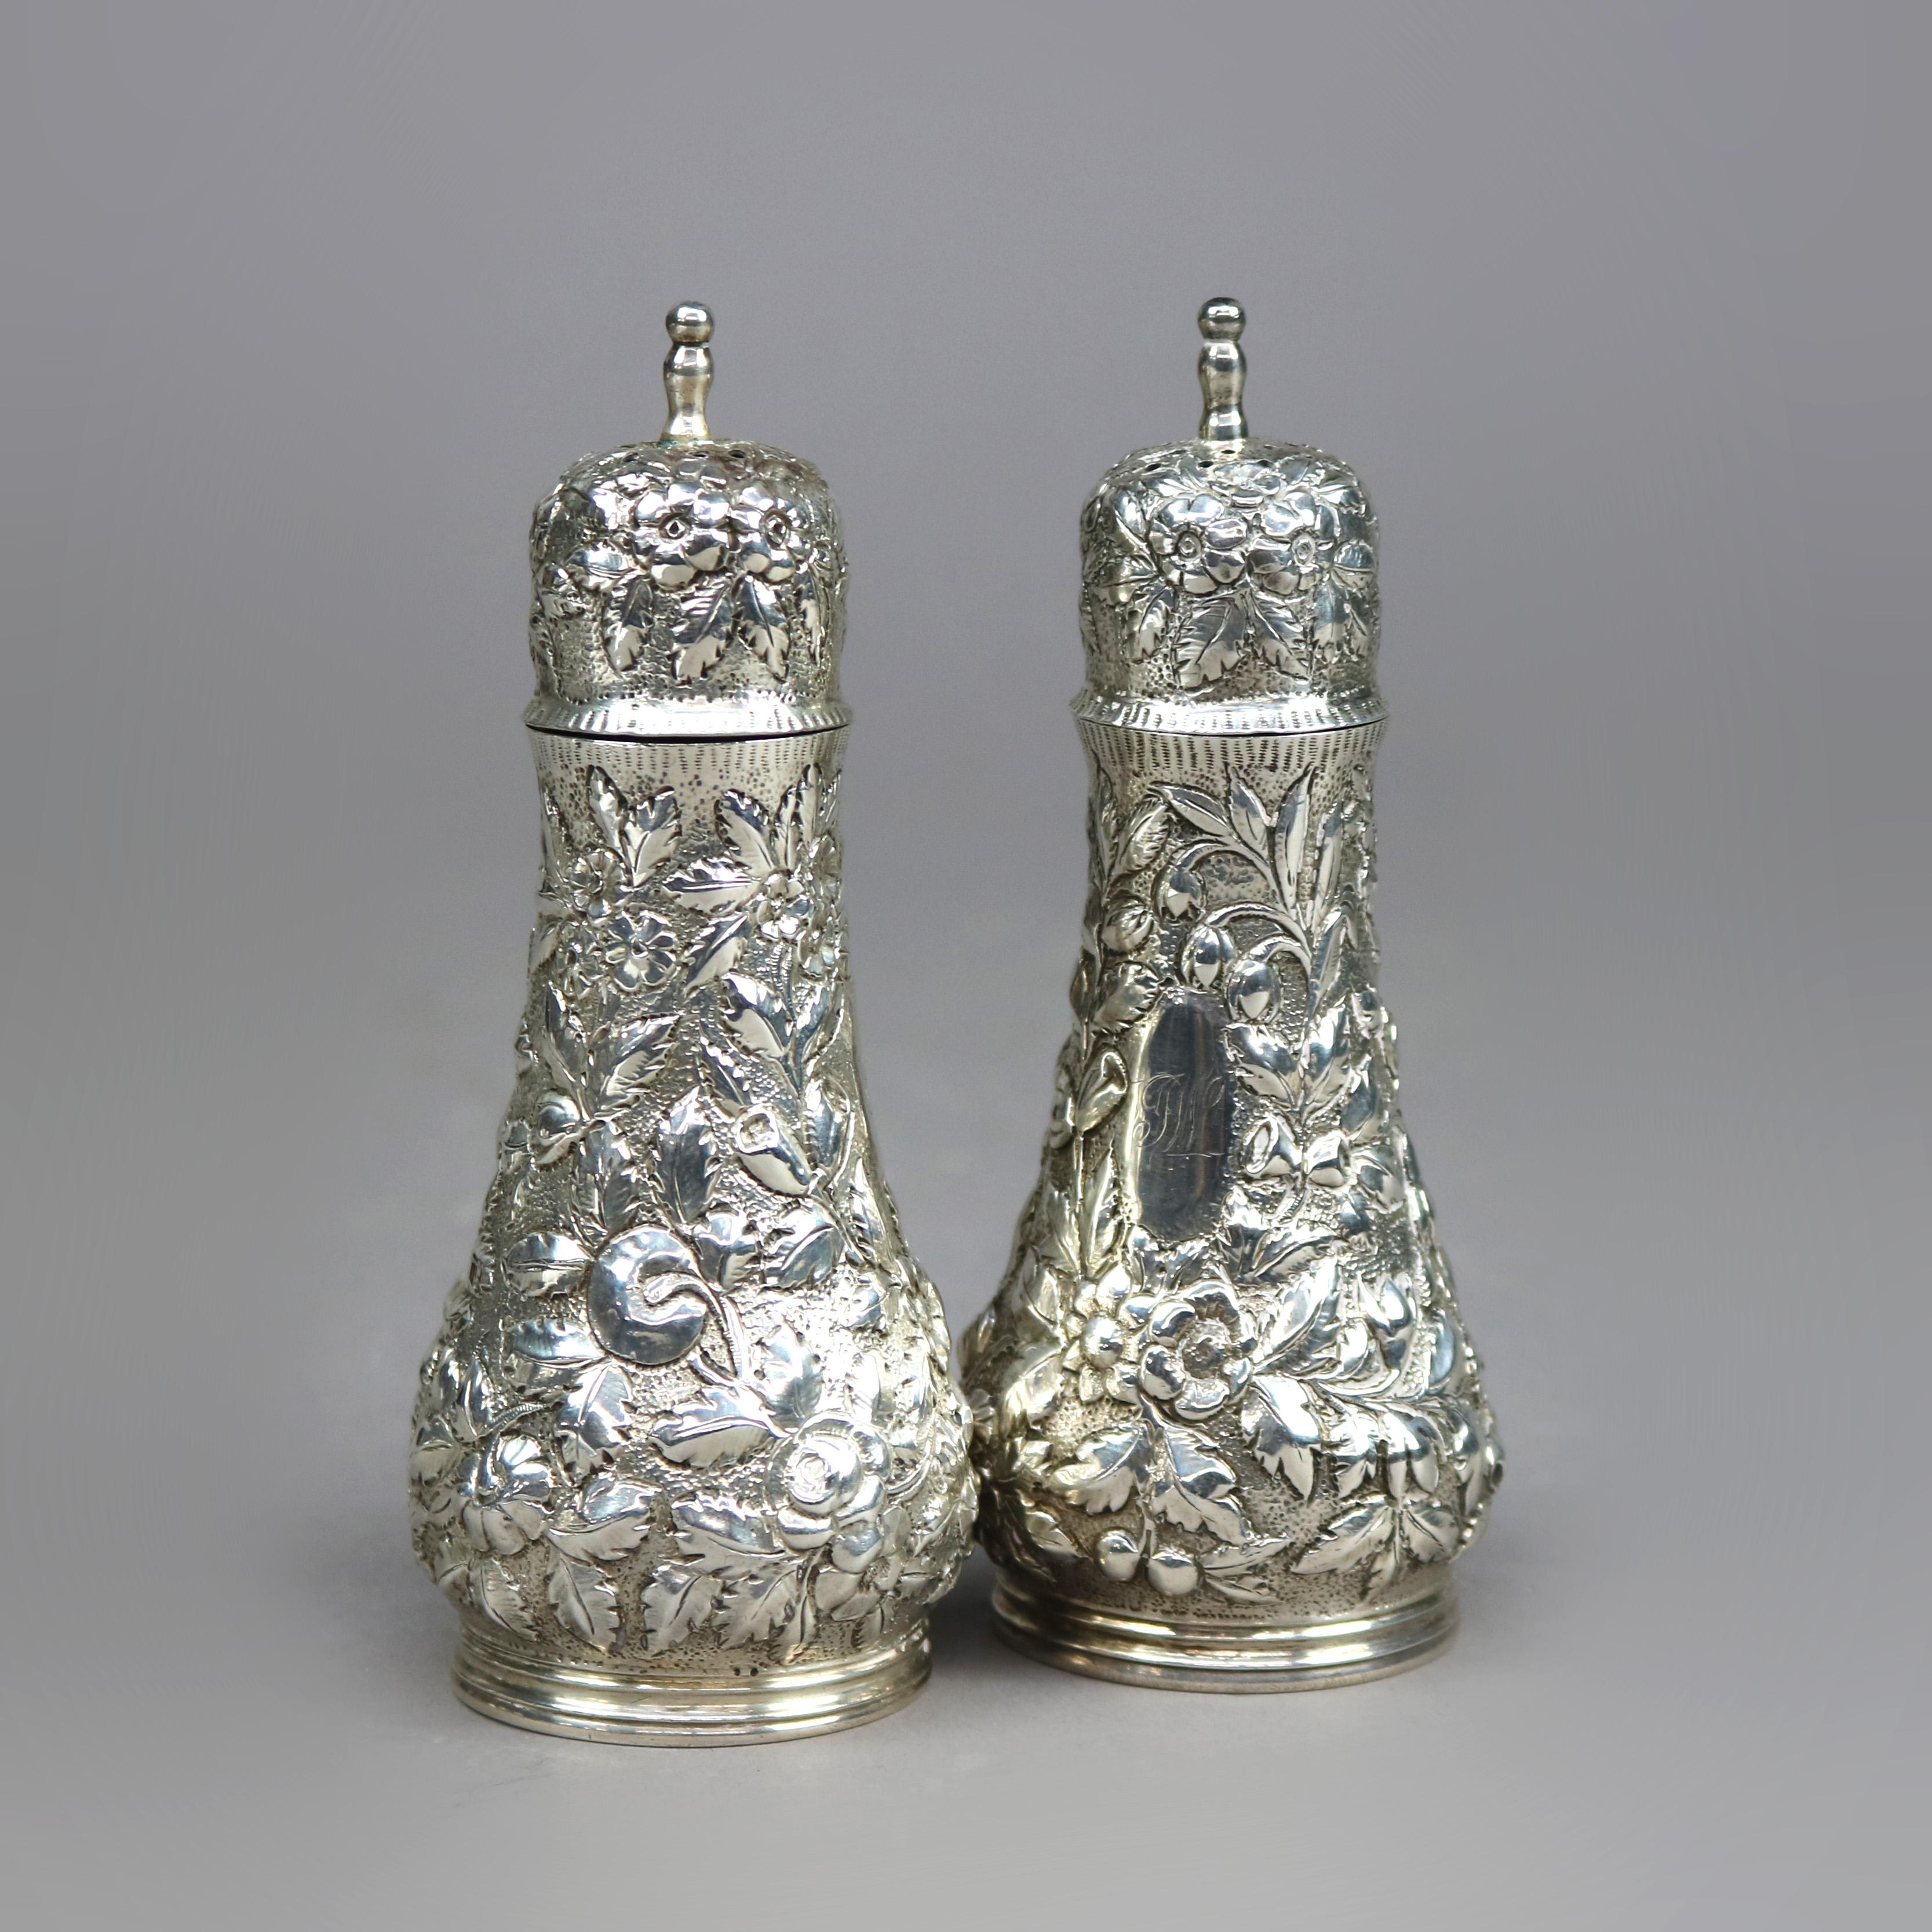 An antique pair of salt and pepper shakers by S. Kirk and Sons offer sterling silver floral repousse construction, maker mark on base as photographed, c1890

Measures - 5.25''H x 2''W x 2''D.